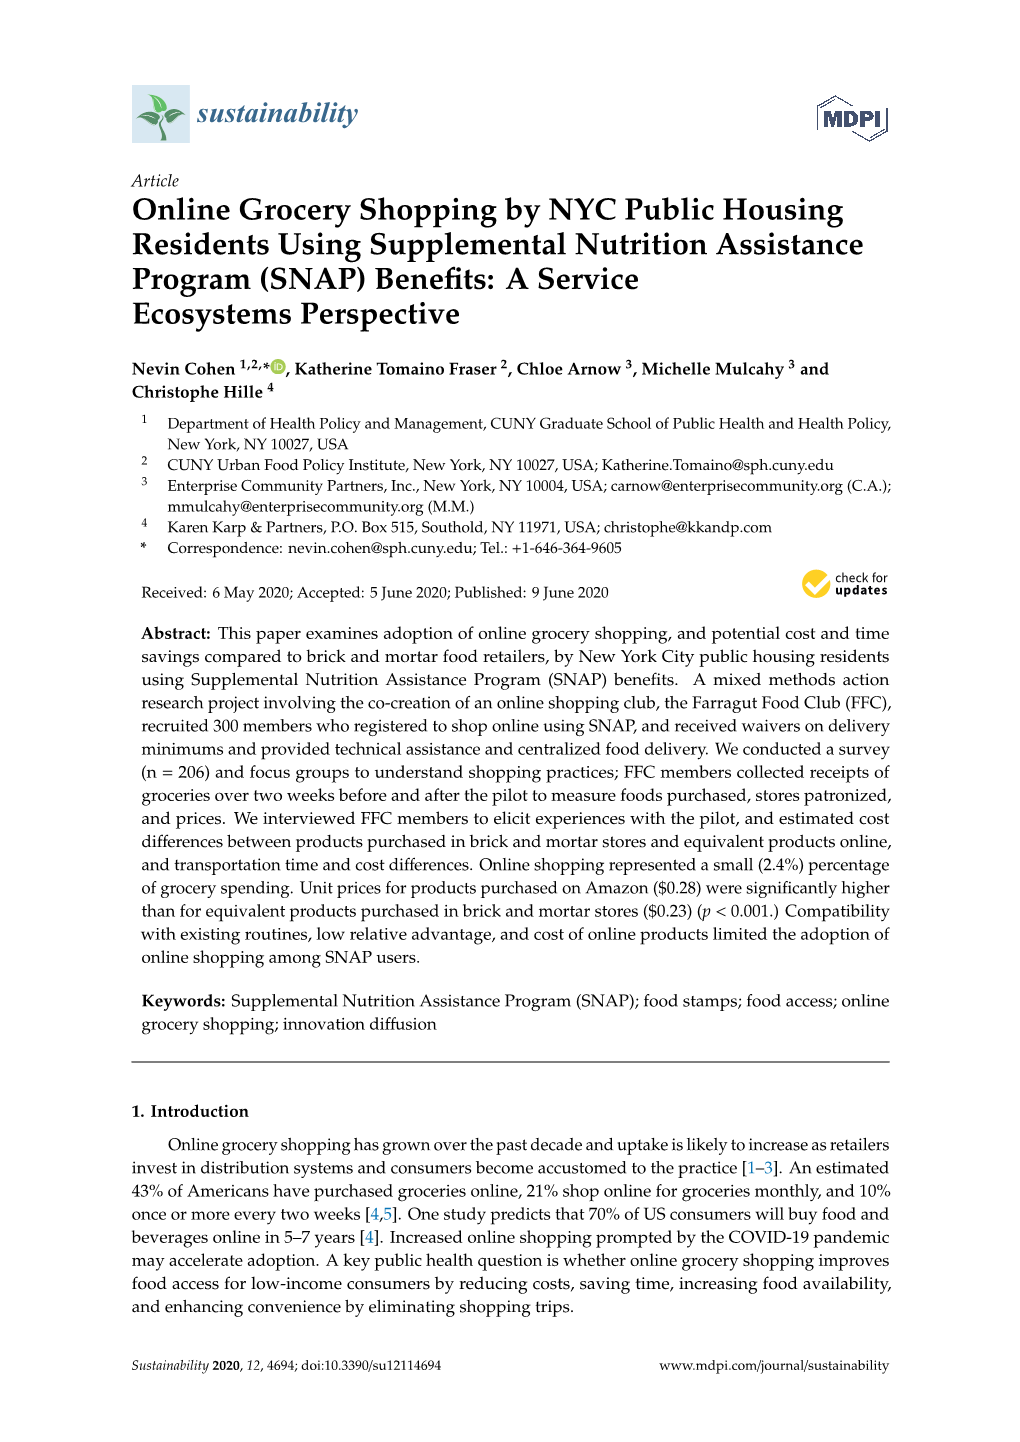 Online Grocery Shopping by NYC Public Housing Residents Using Supplemental Nutrition Assistance Program (SNAP) Beneﬁts: a Service Ecosystems Perspective